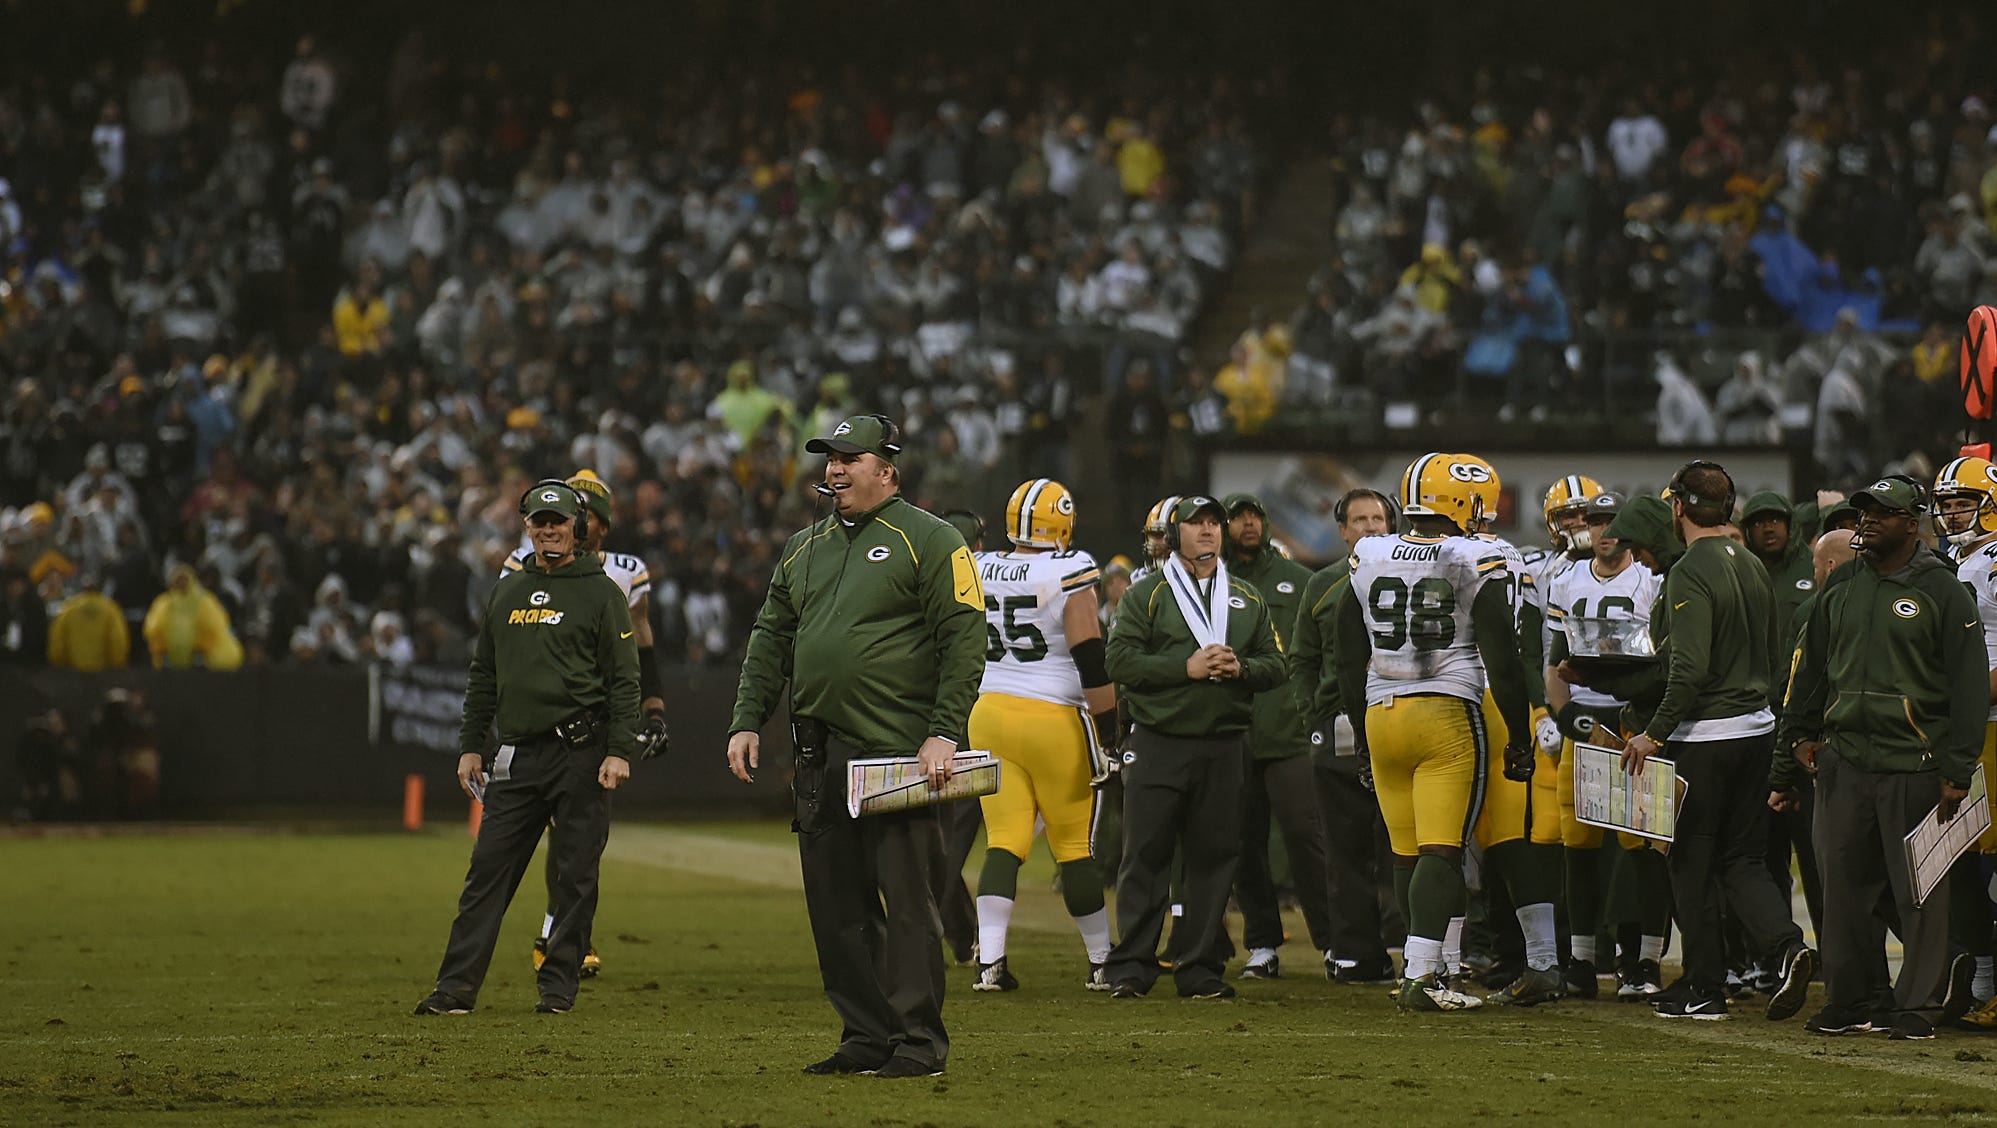 Green Bay Packers coach Mike McCarthy reacts after James Jones was penalized while making a catch in the end zone in the fourth quarter against the Oakland Raiders on Dec. 20, 2015, at the O.co Coliseum in Oakland, Calif.